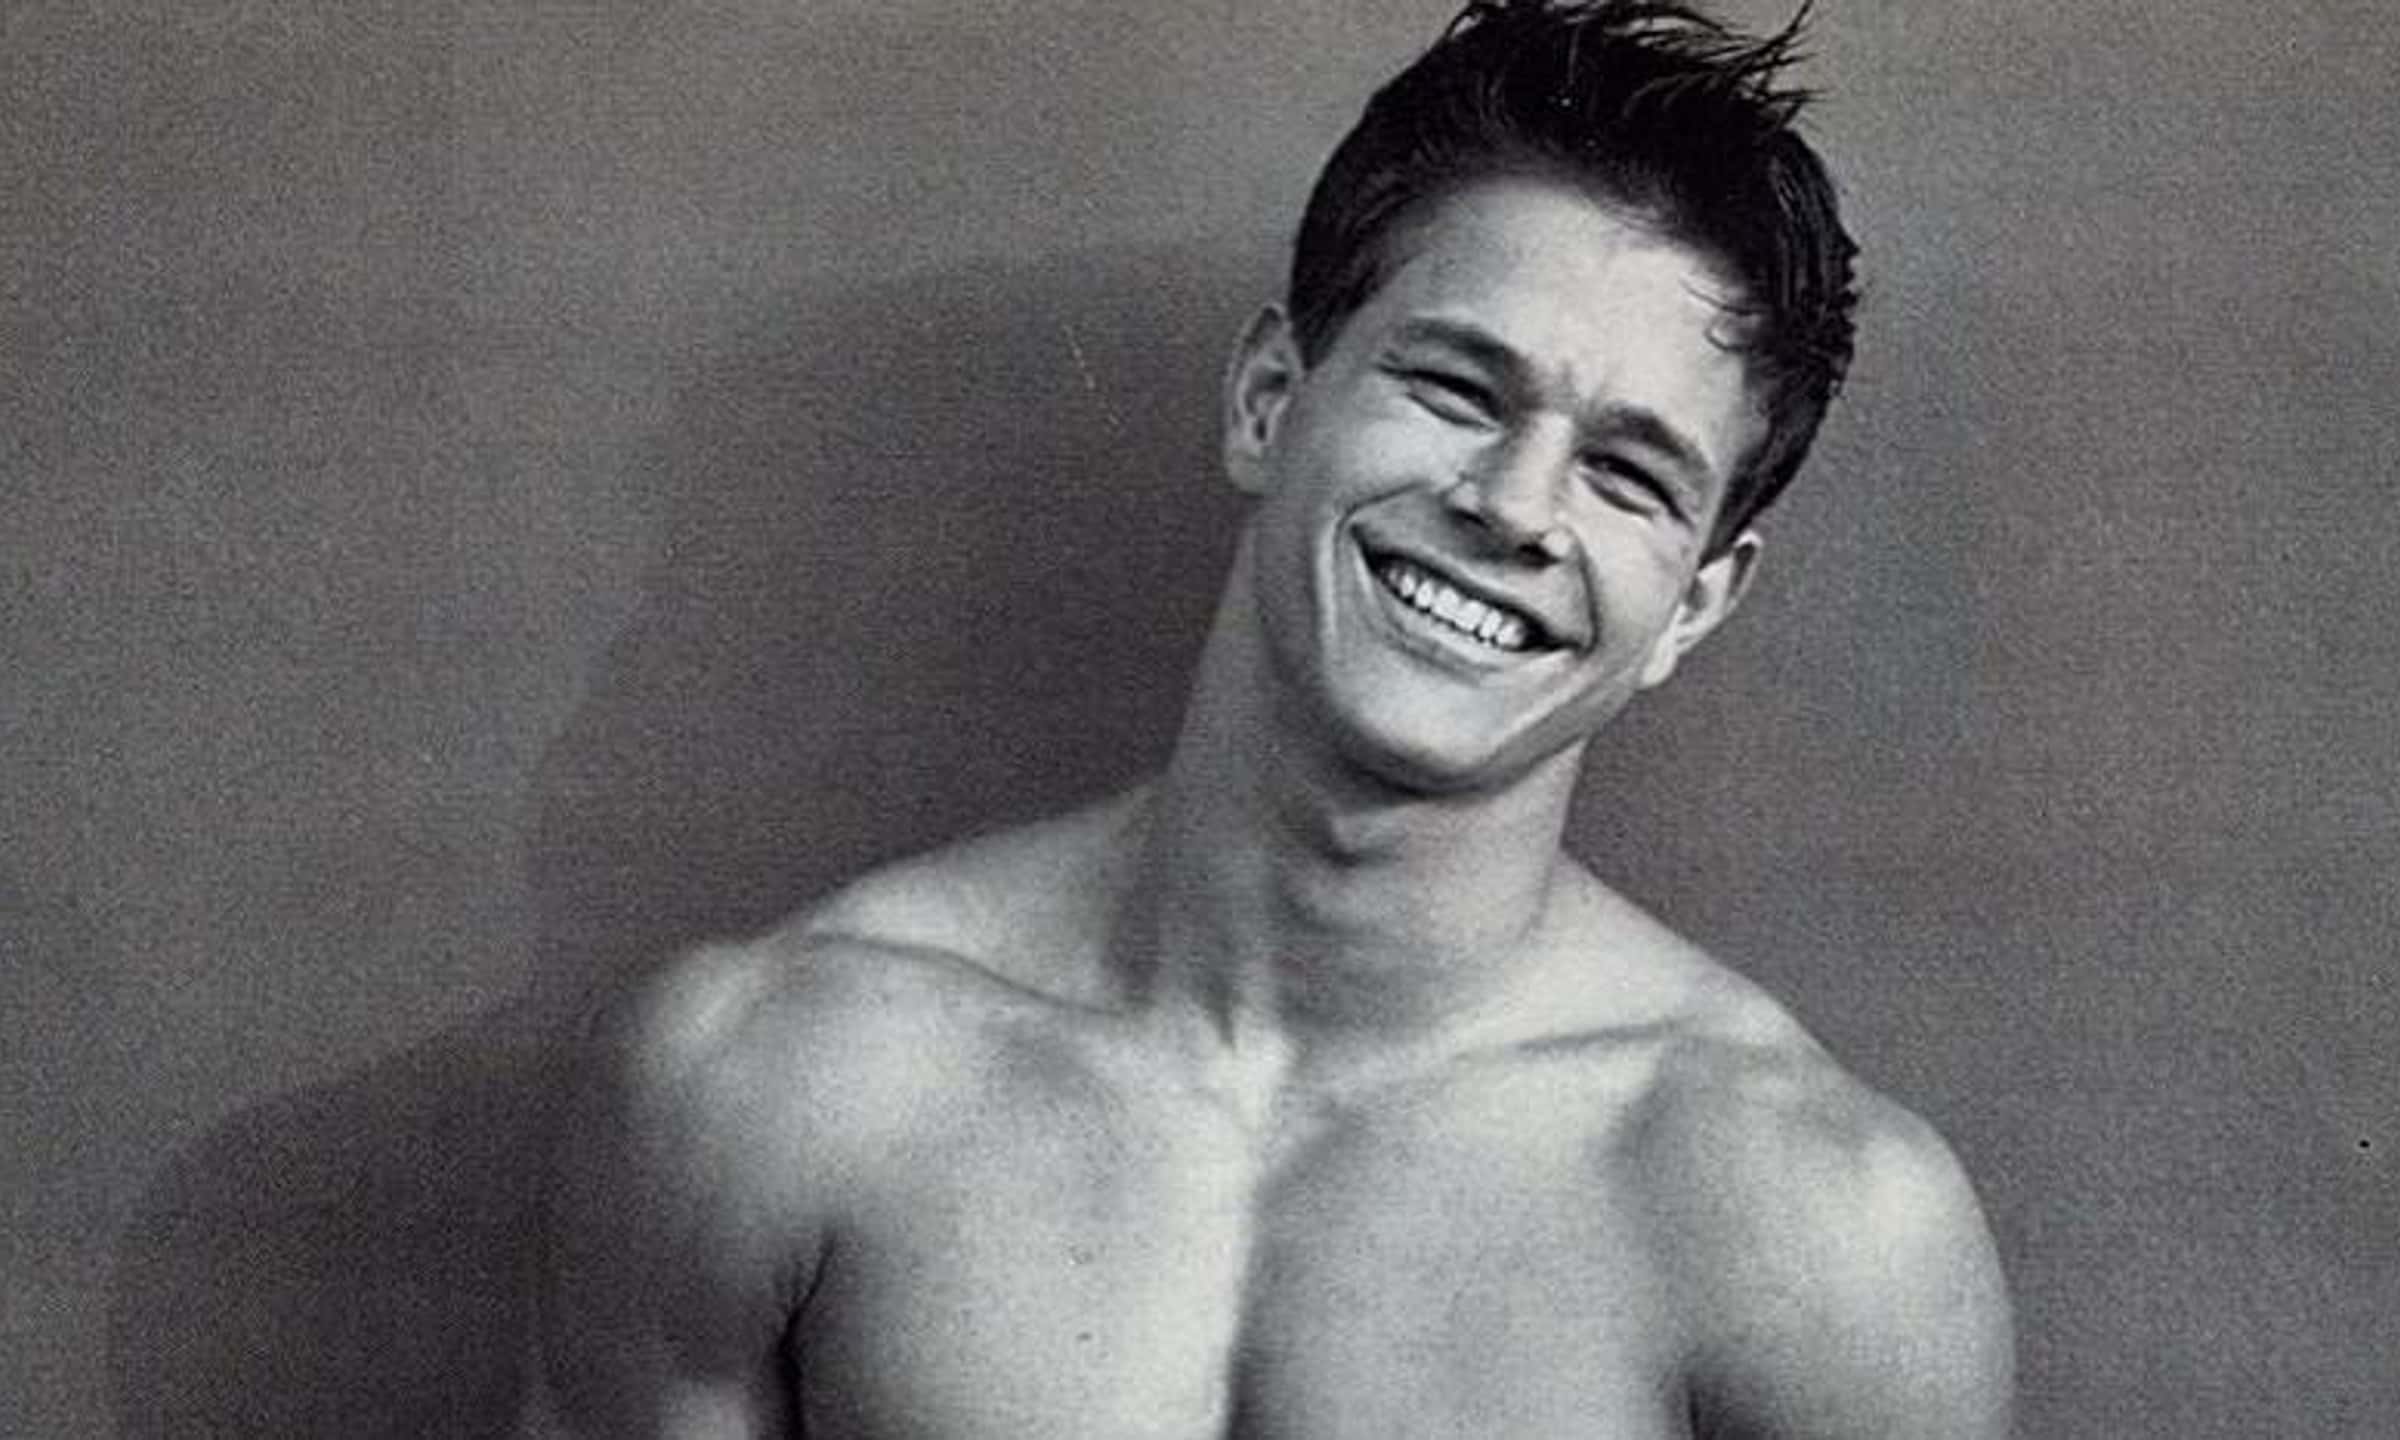 A young Mark Wahlberg